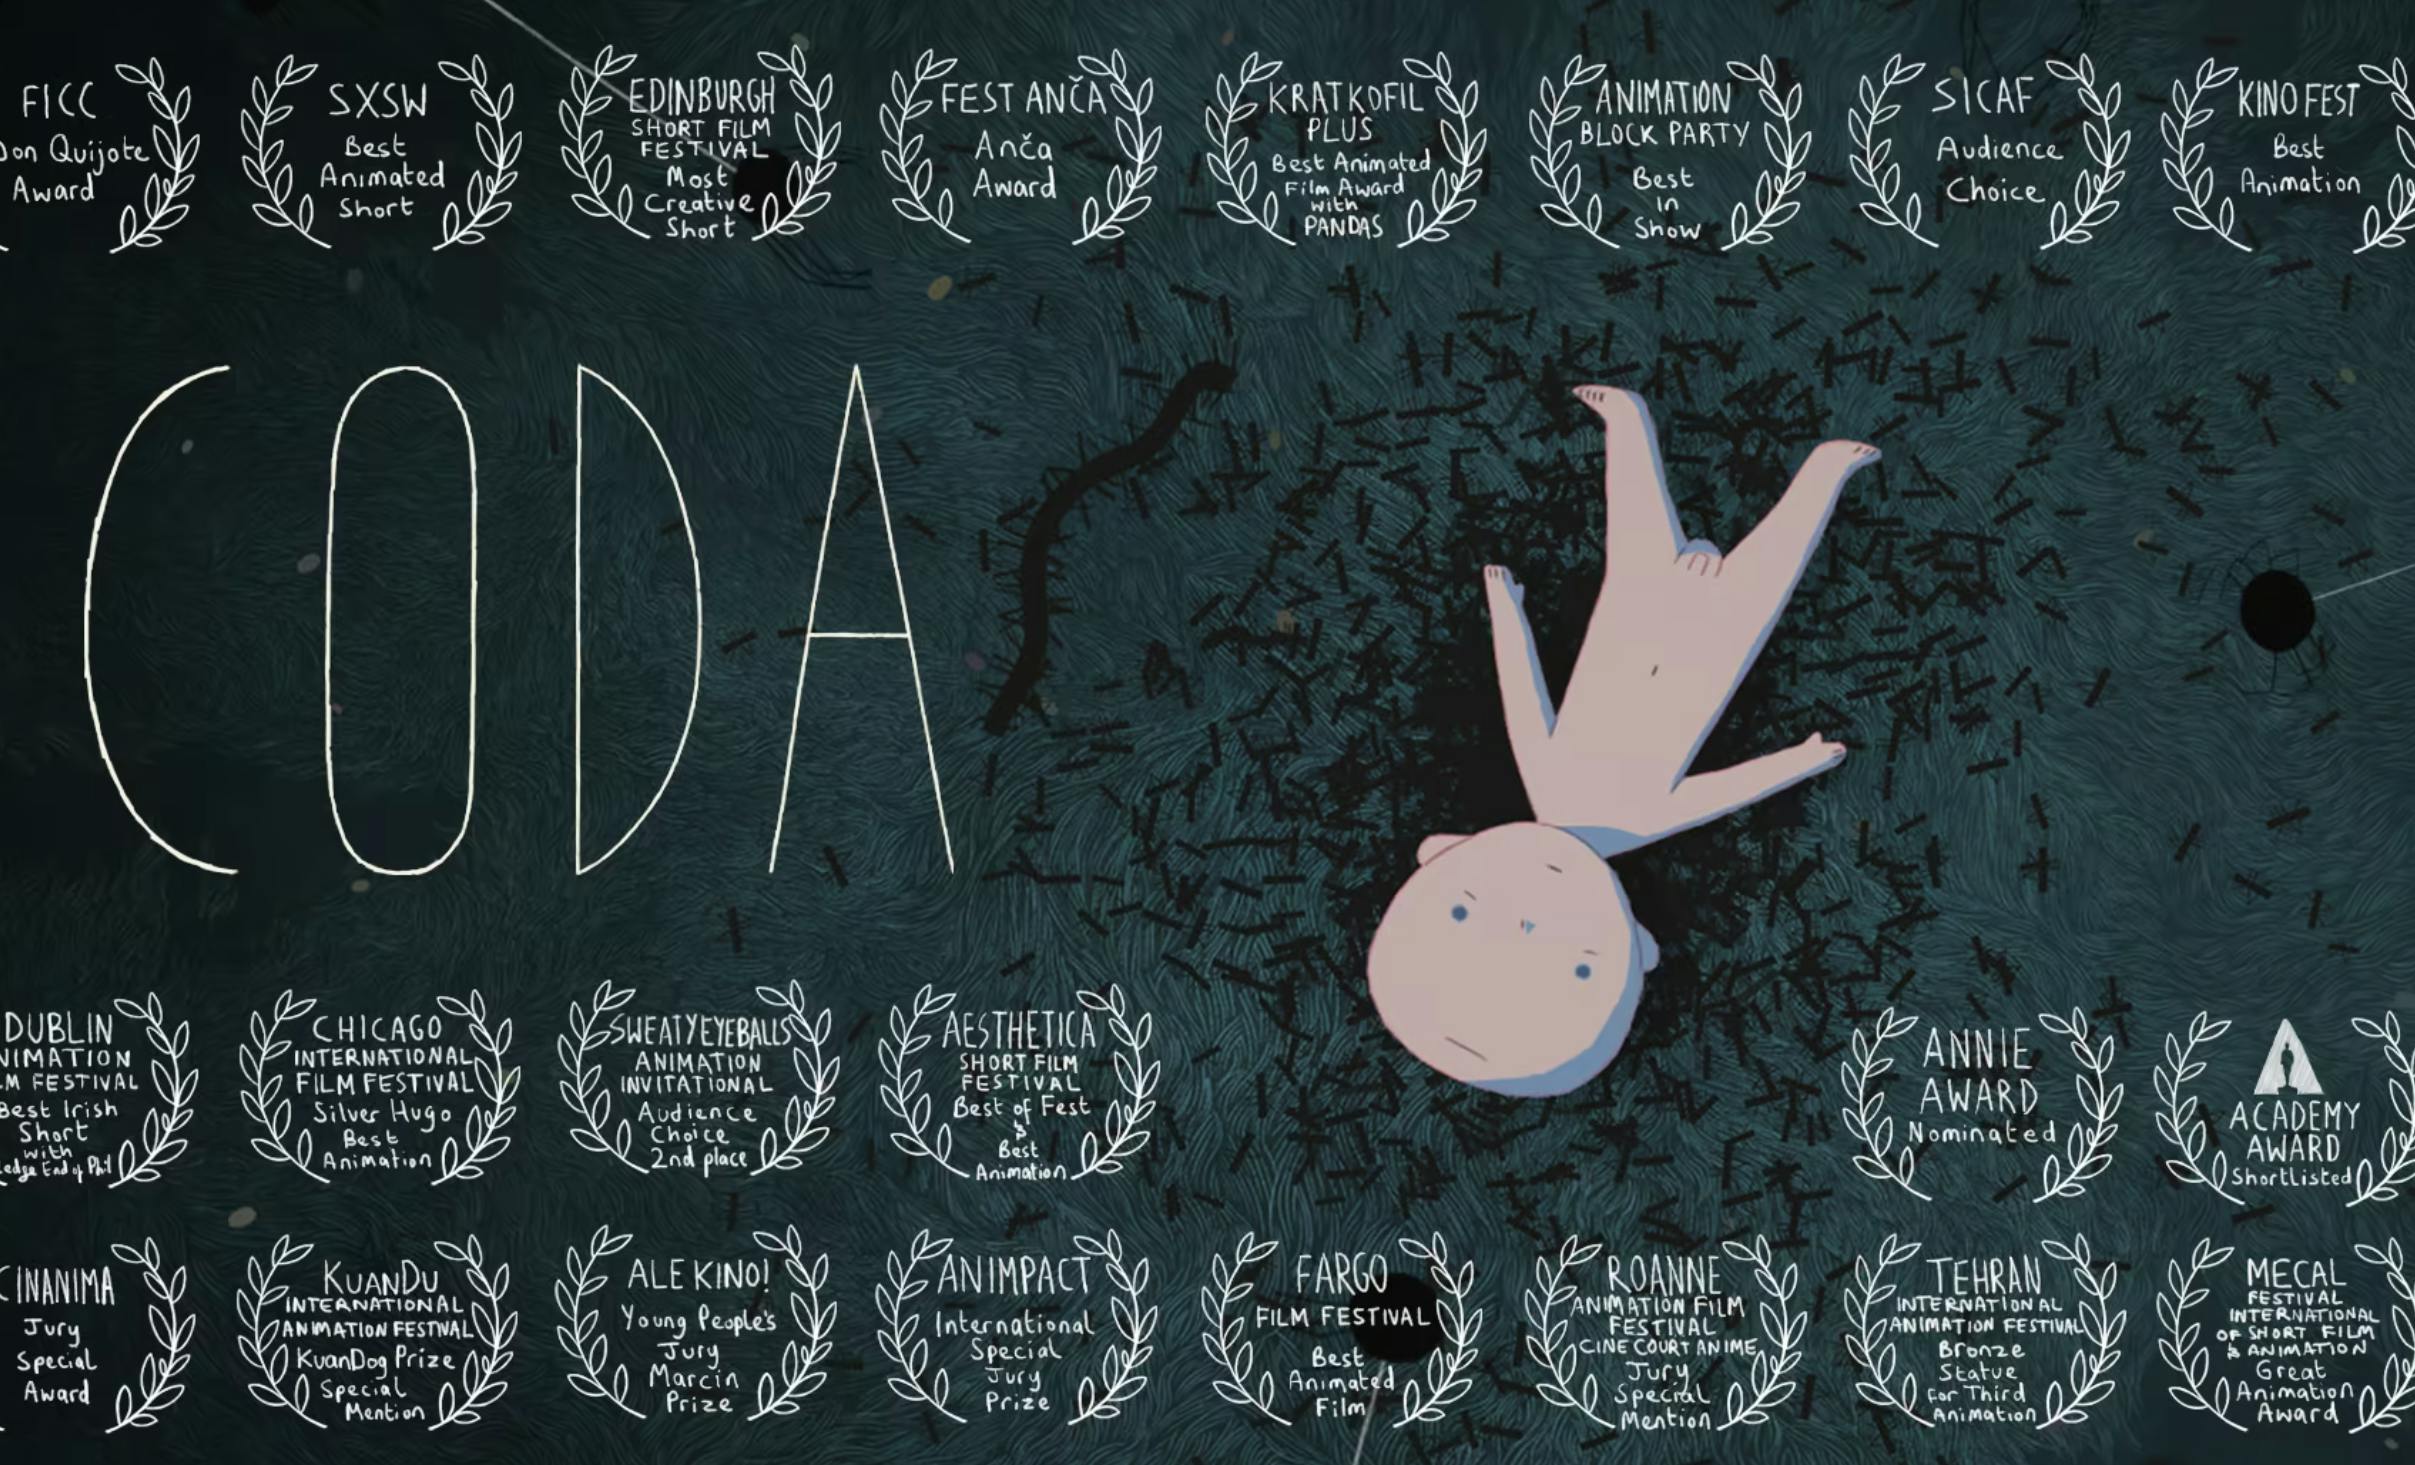 preview image for Alan Holly's Coda (2014). A dark green grassy background, with a nude character lying down, surrounded by black bugs. The title "CODA" is next to him, and the rest of the image is taken up by the various awards that "Coda" has won